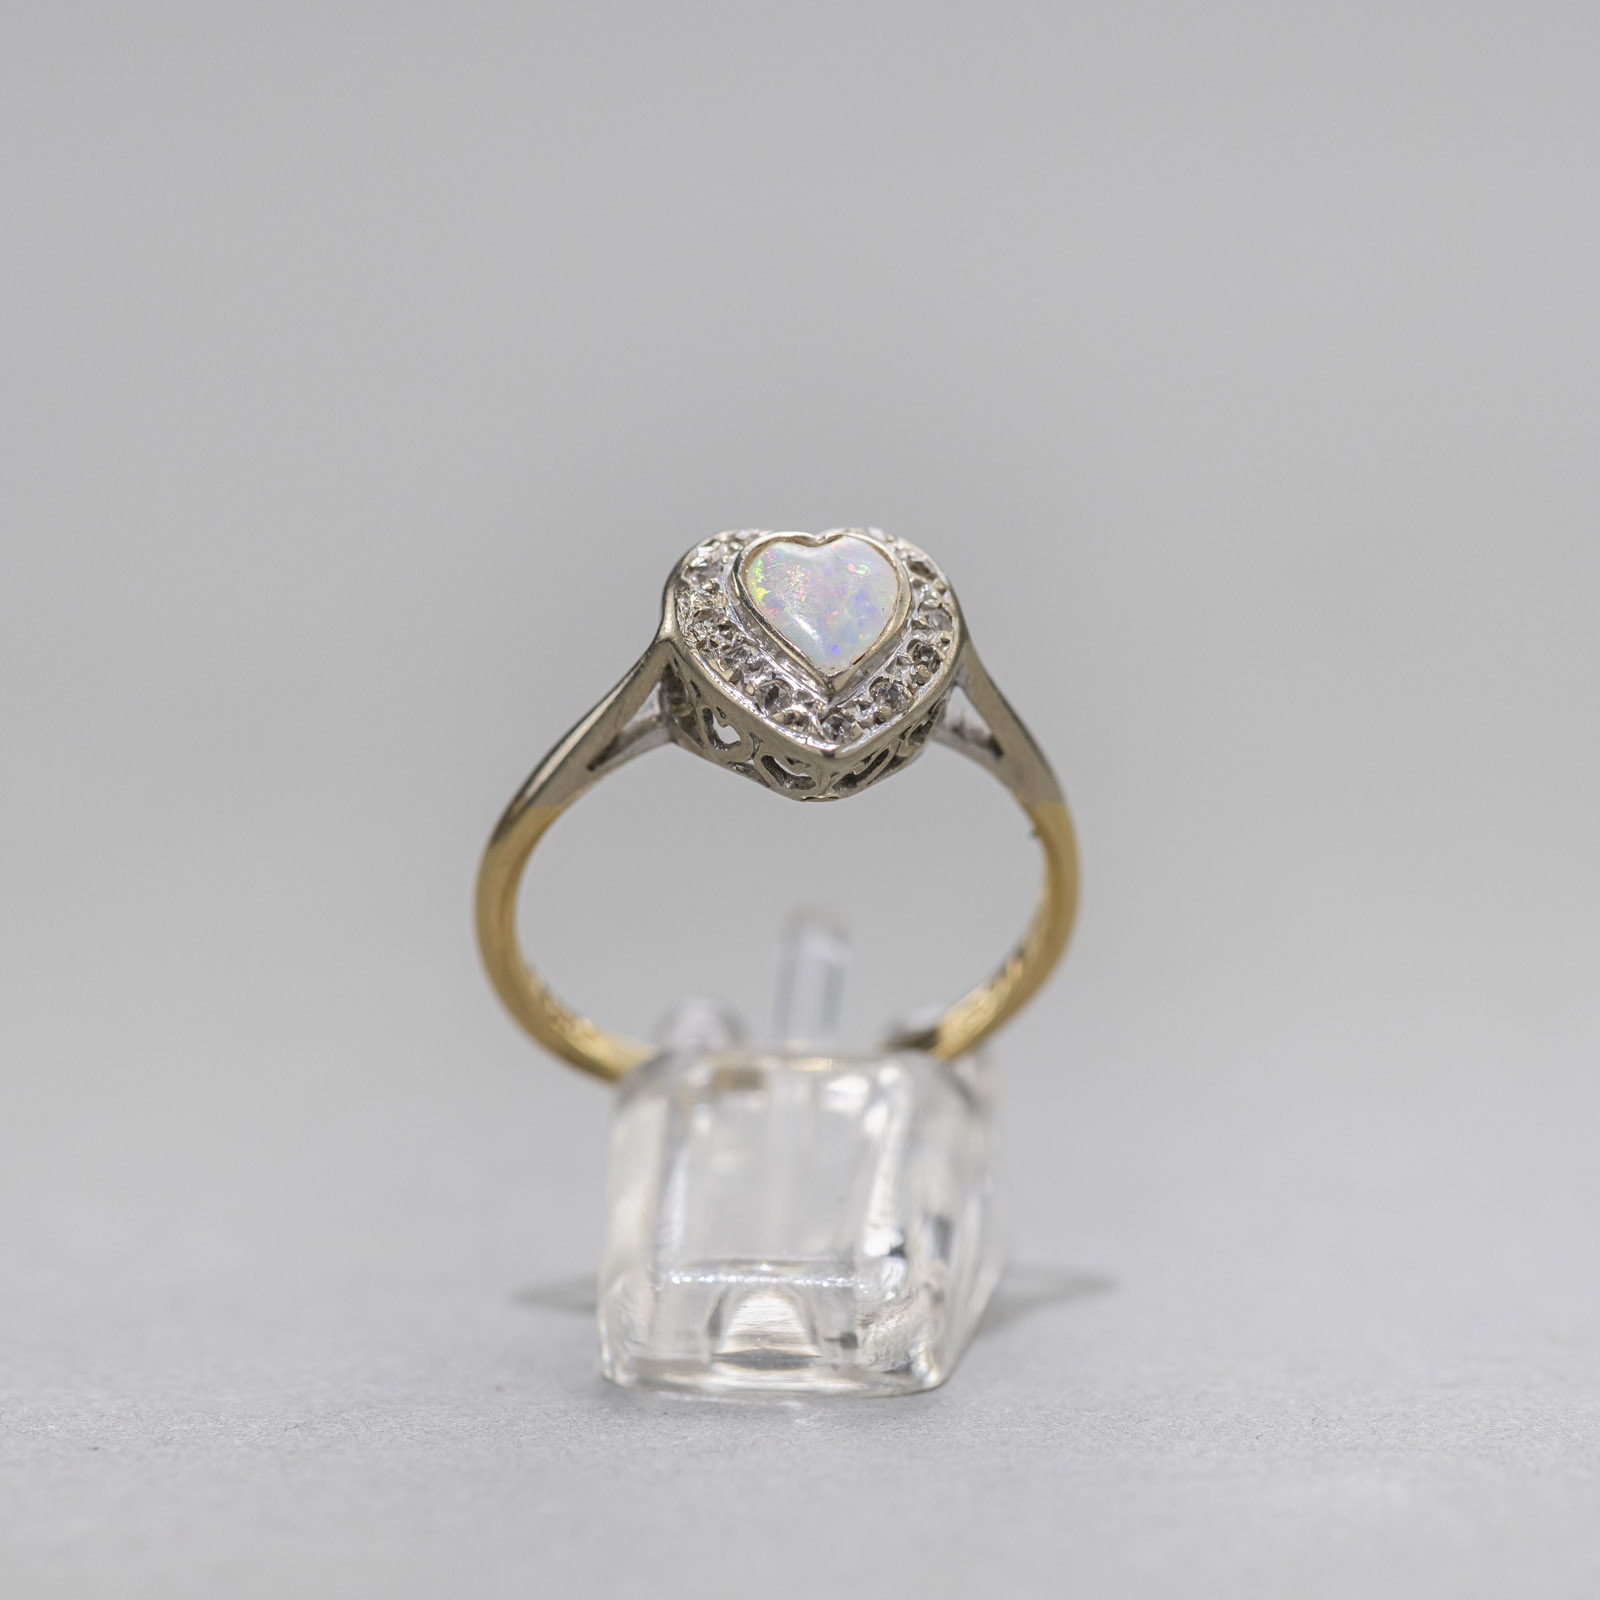 <b>HART SHAPED RING WITH WHITE OPAL</b>